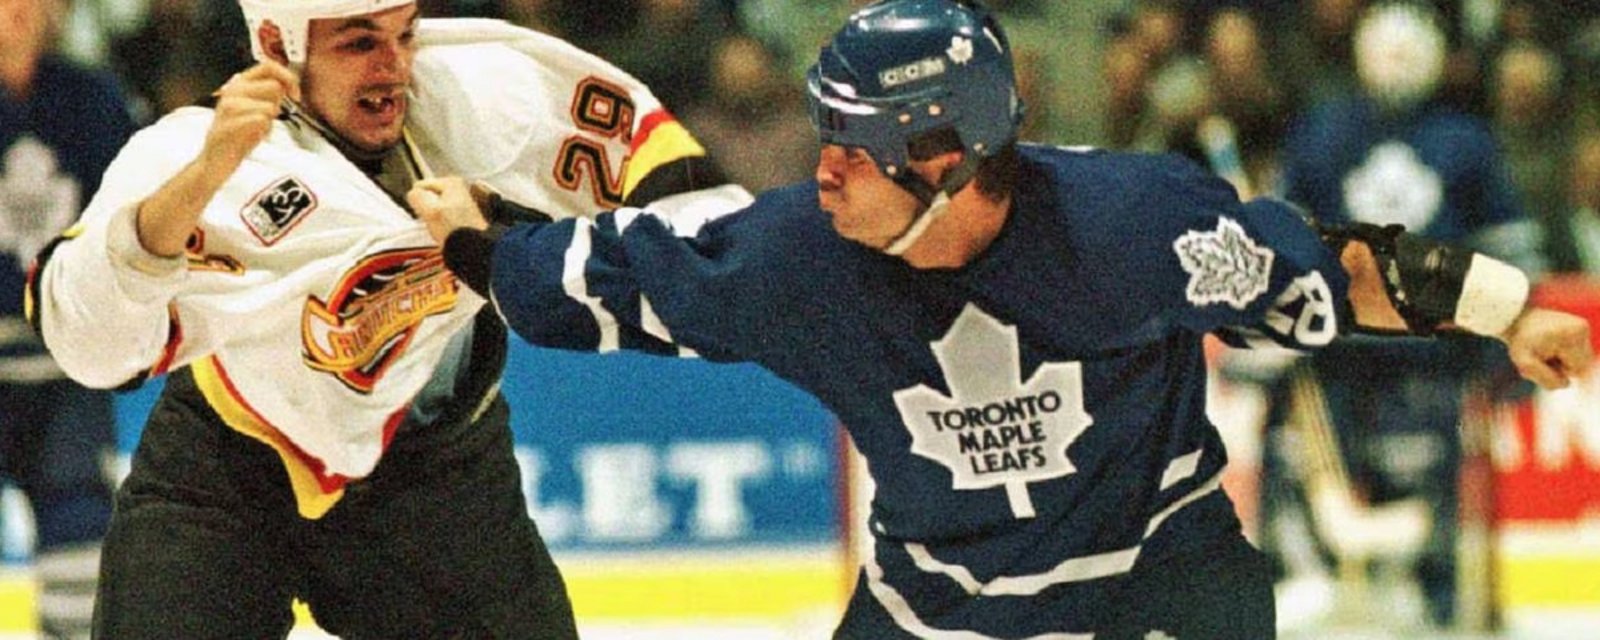 Former NHL enforcer Gino Odjick has died.